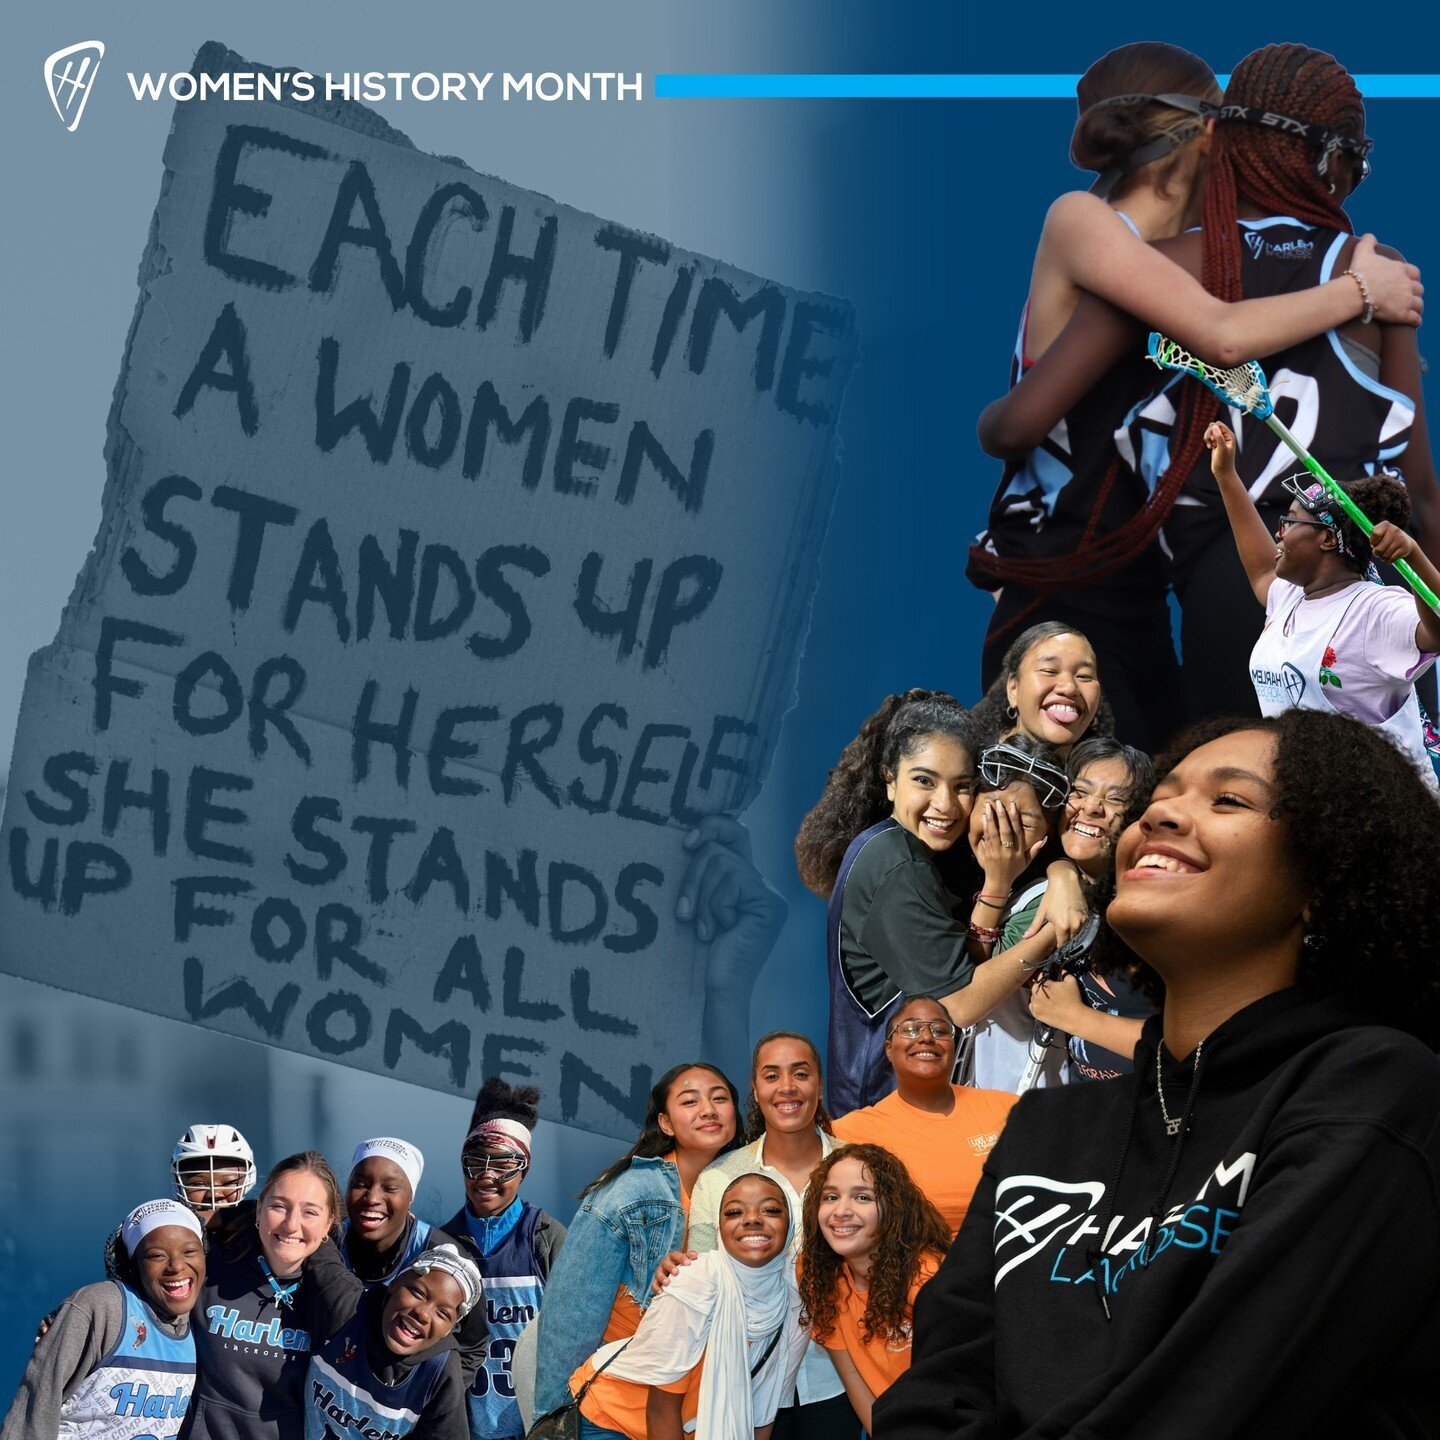 On the field and off, women continue to break barriers and redefine what's possible. This #WomensHistoryMonth, we celebrate the achievements of women who've transformed lacrosse and the world. Their legacy is our playbook.